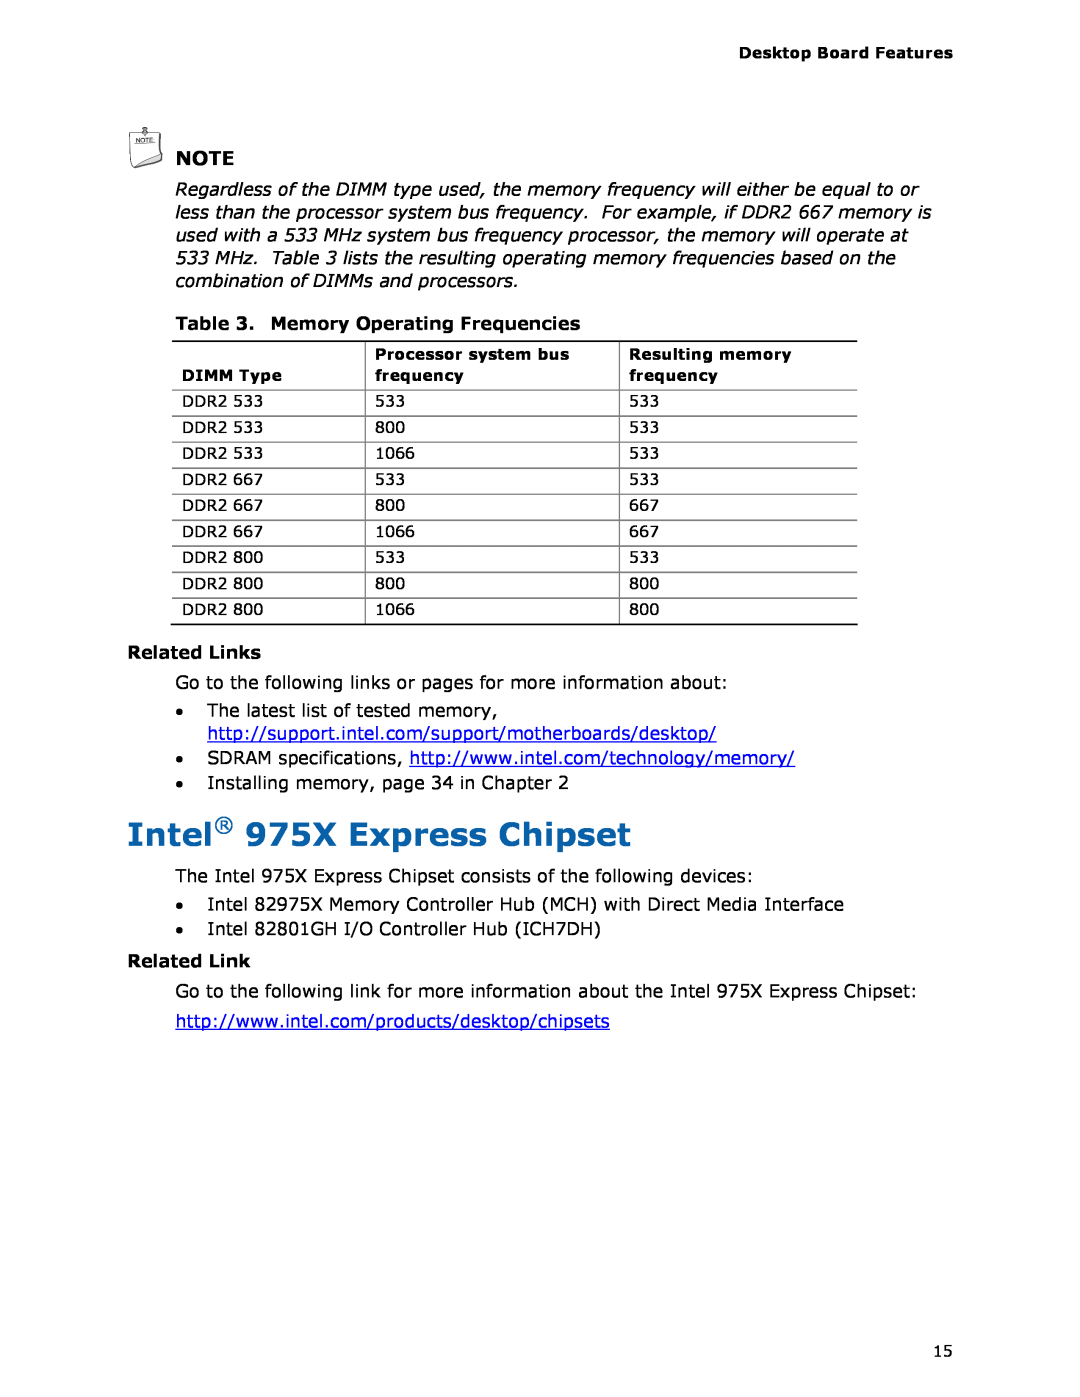 Intel D975XBX2 manual Intel 975X Express Chipset, Memory Operating Frequencies, Related Links 